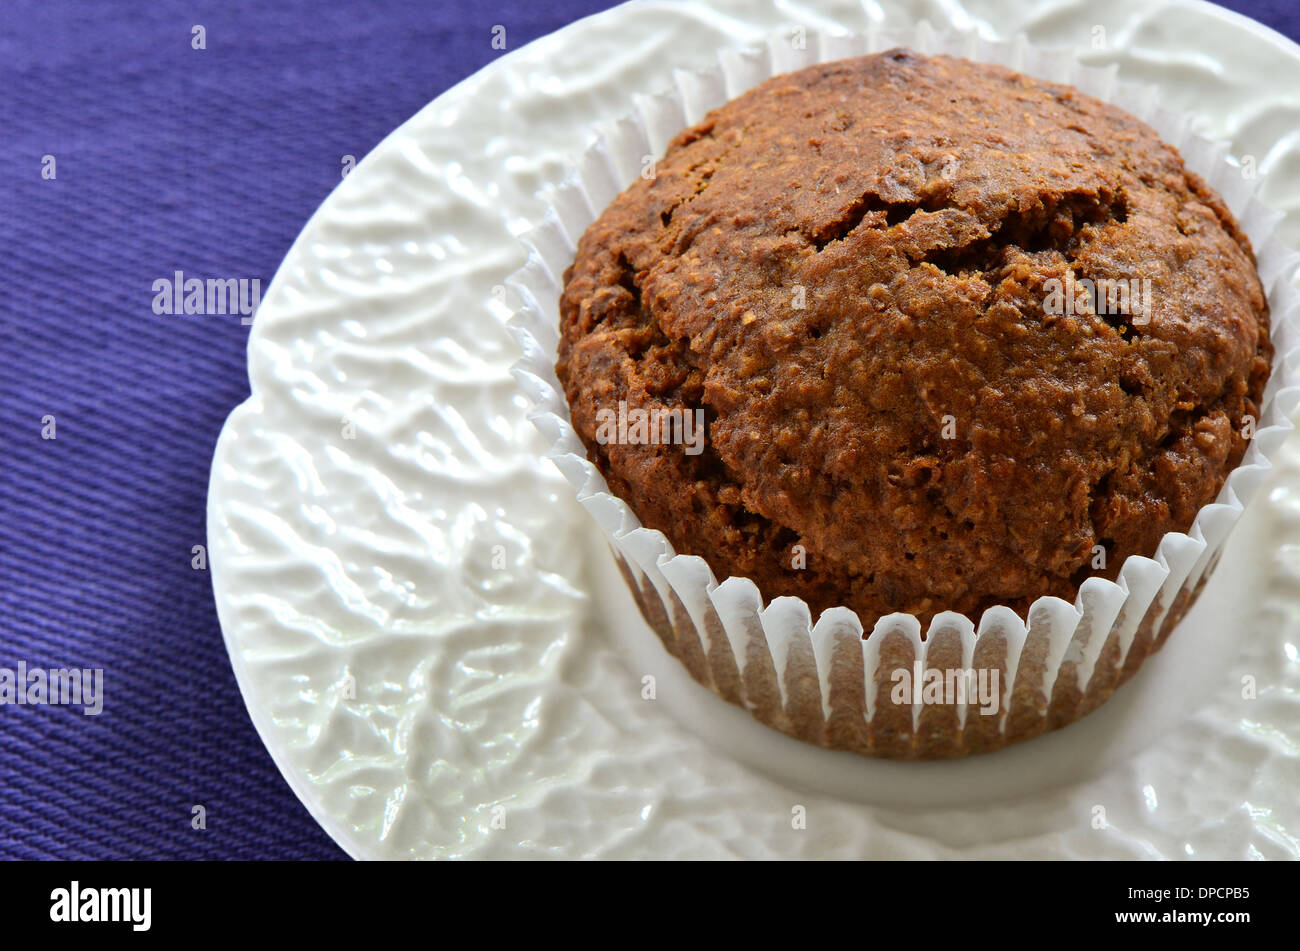 Bran muffin on white rippled plate Stock Photo